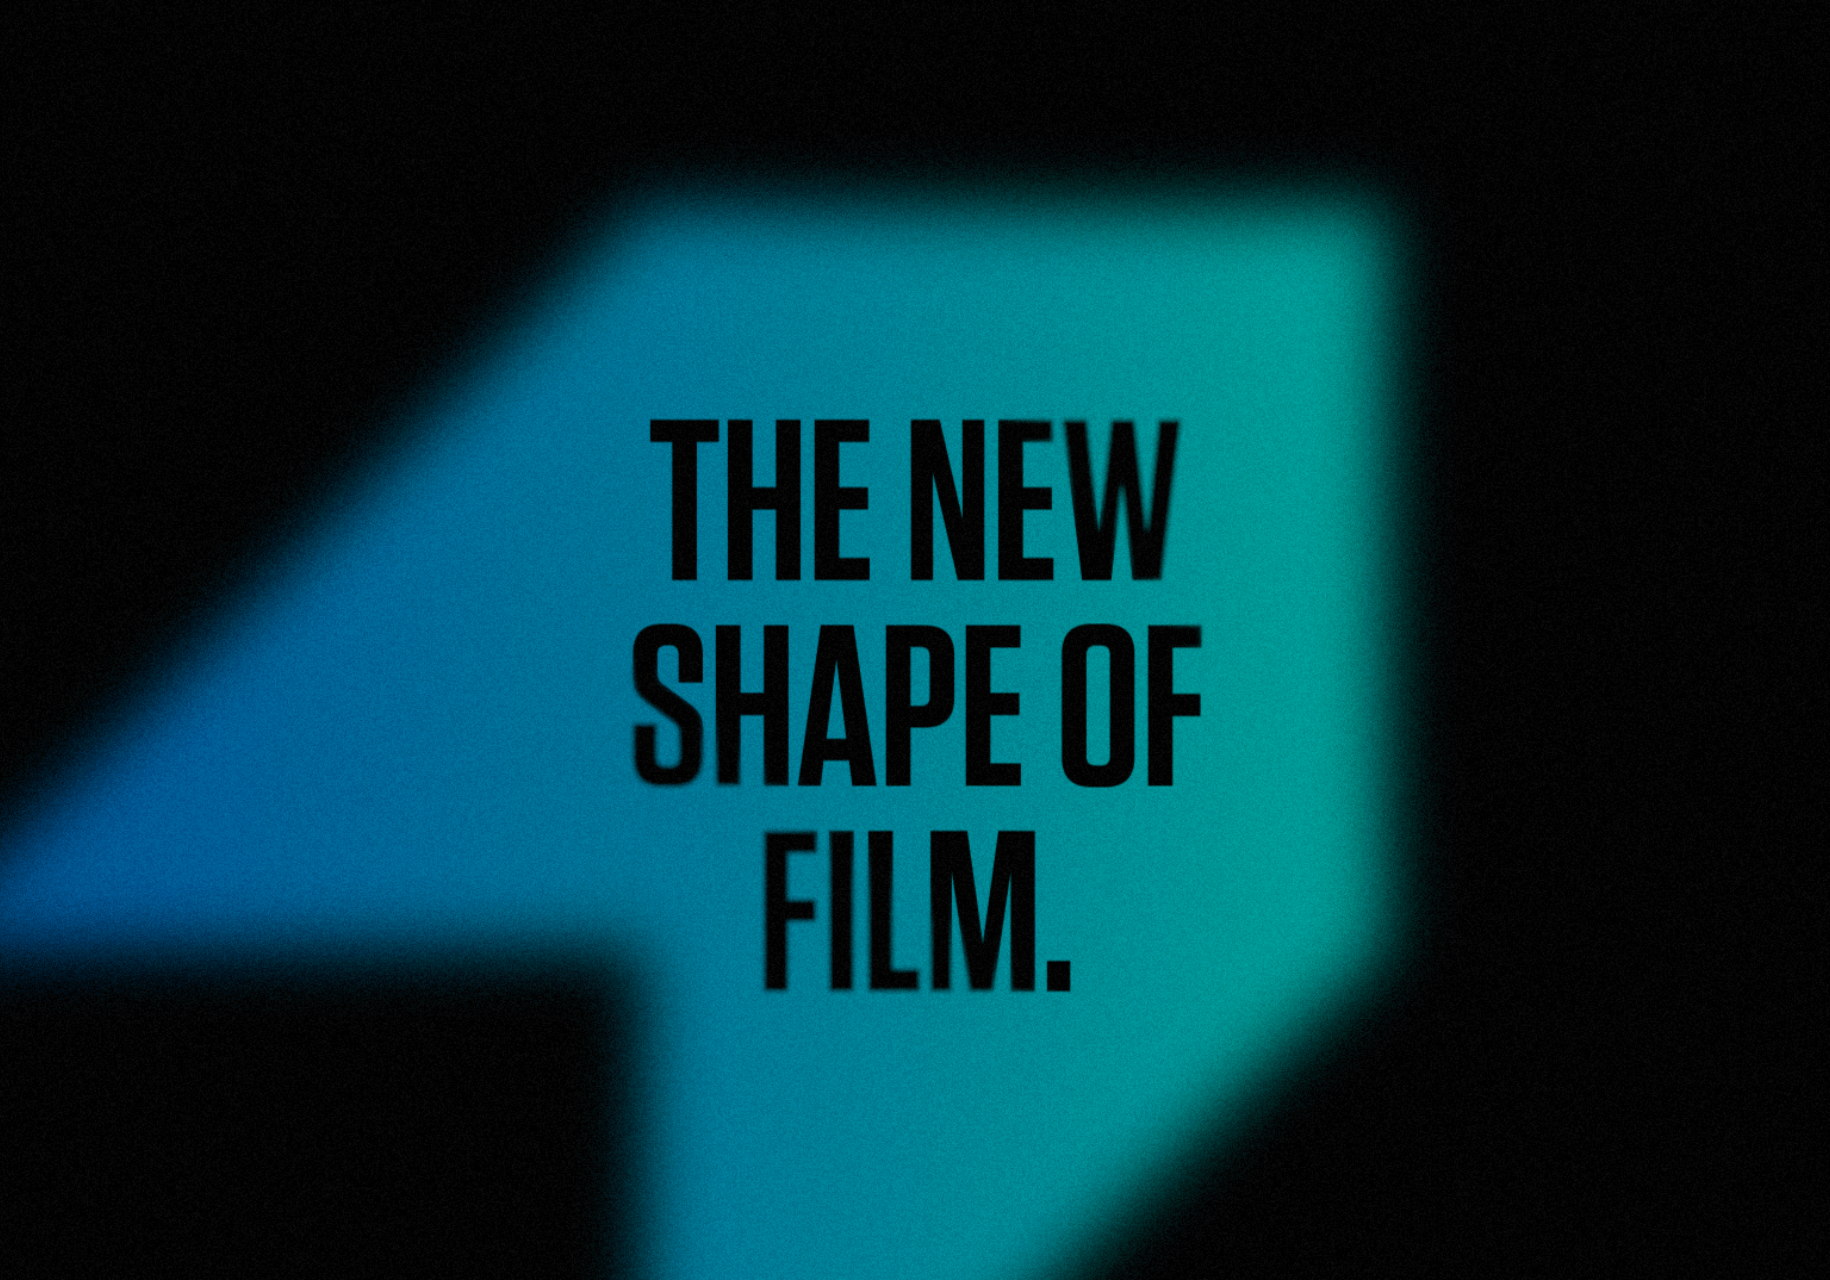 The new shape of film